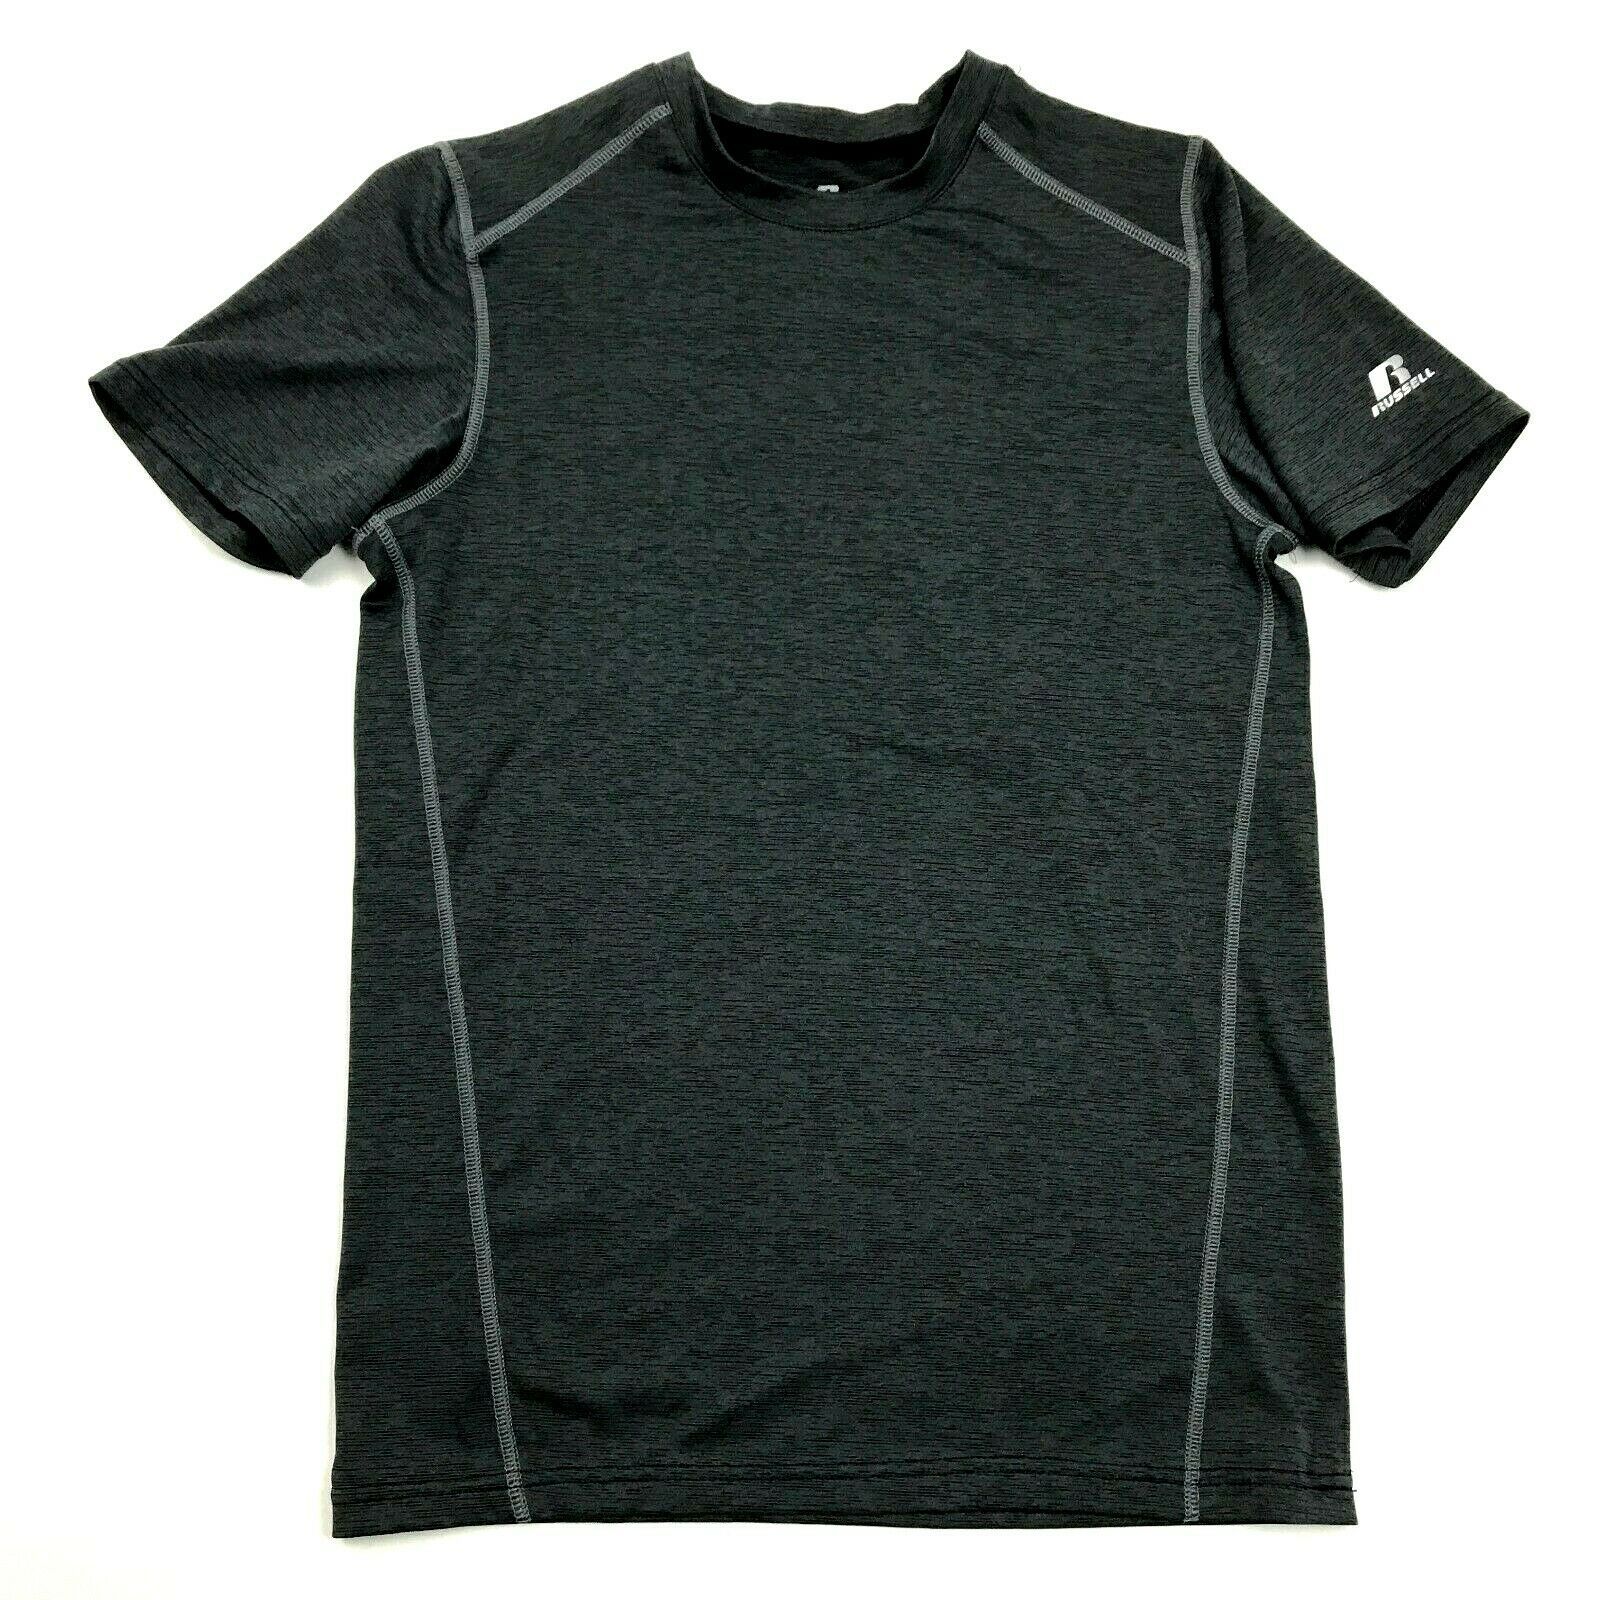 NEW Russell Athletic Dry Fit Shirt Size Small S Fitted Short Sleeve Dri ...